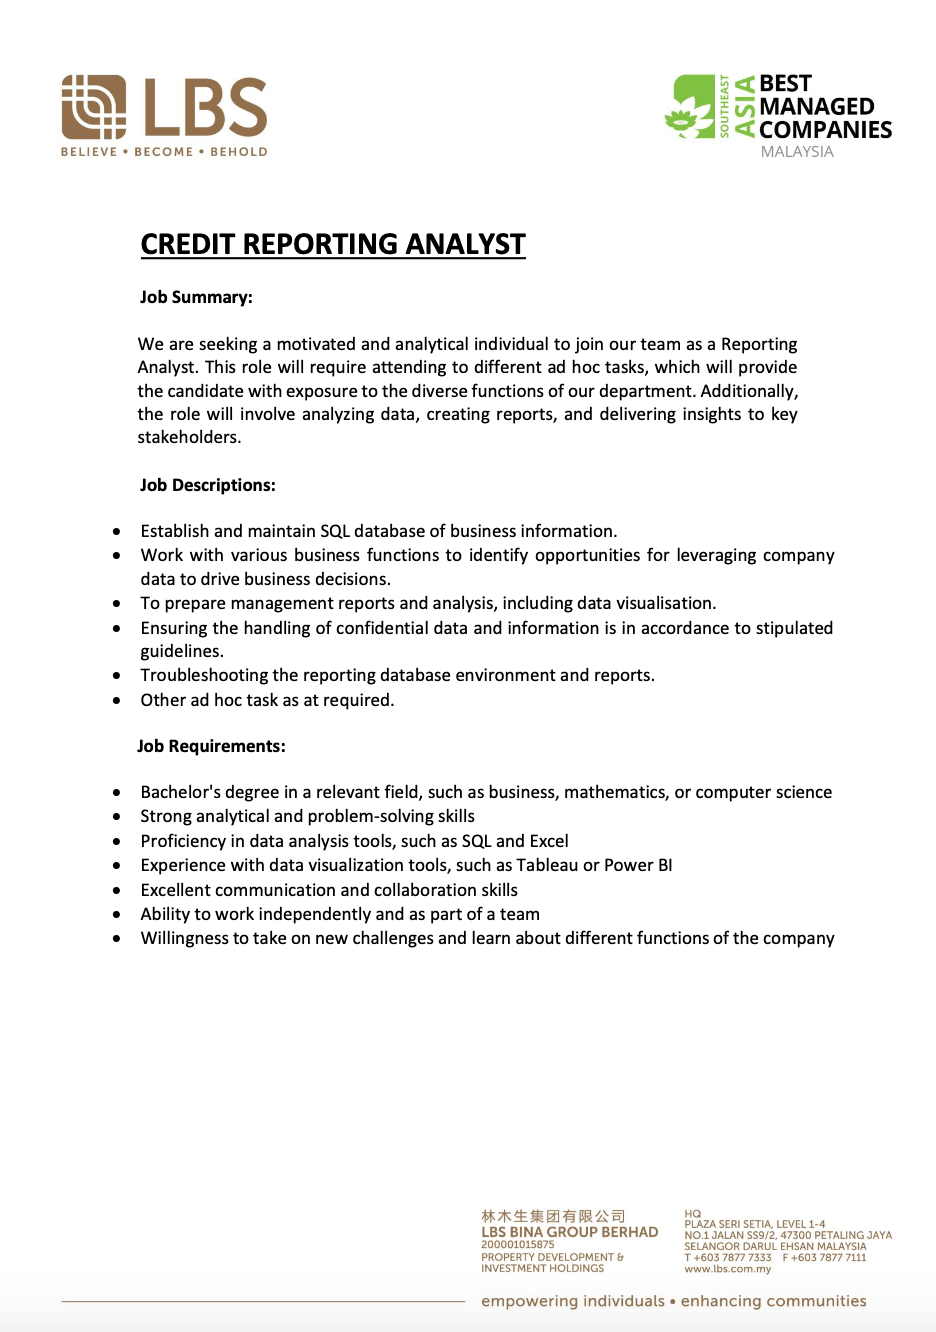 Credit Reporting Analyst 